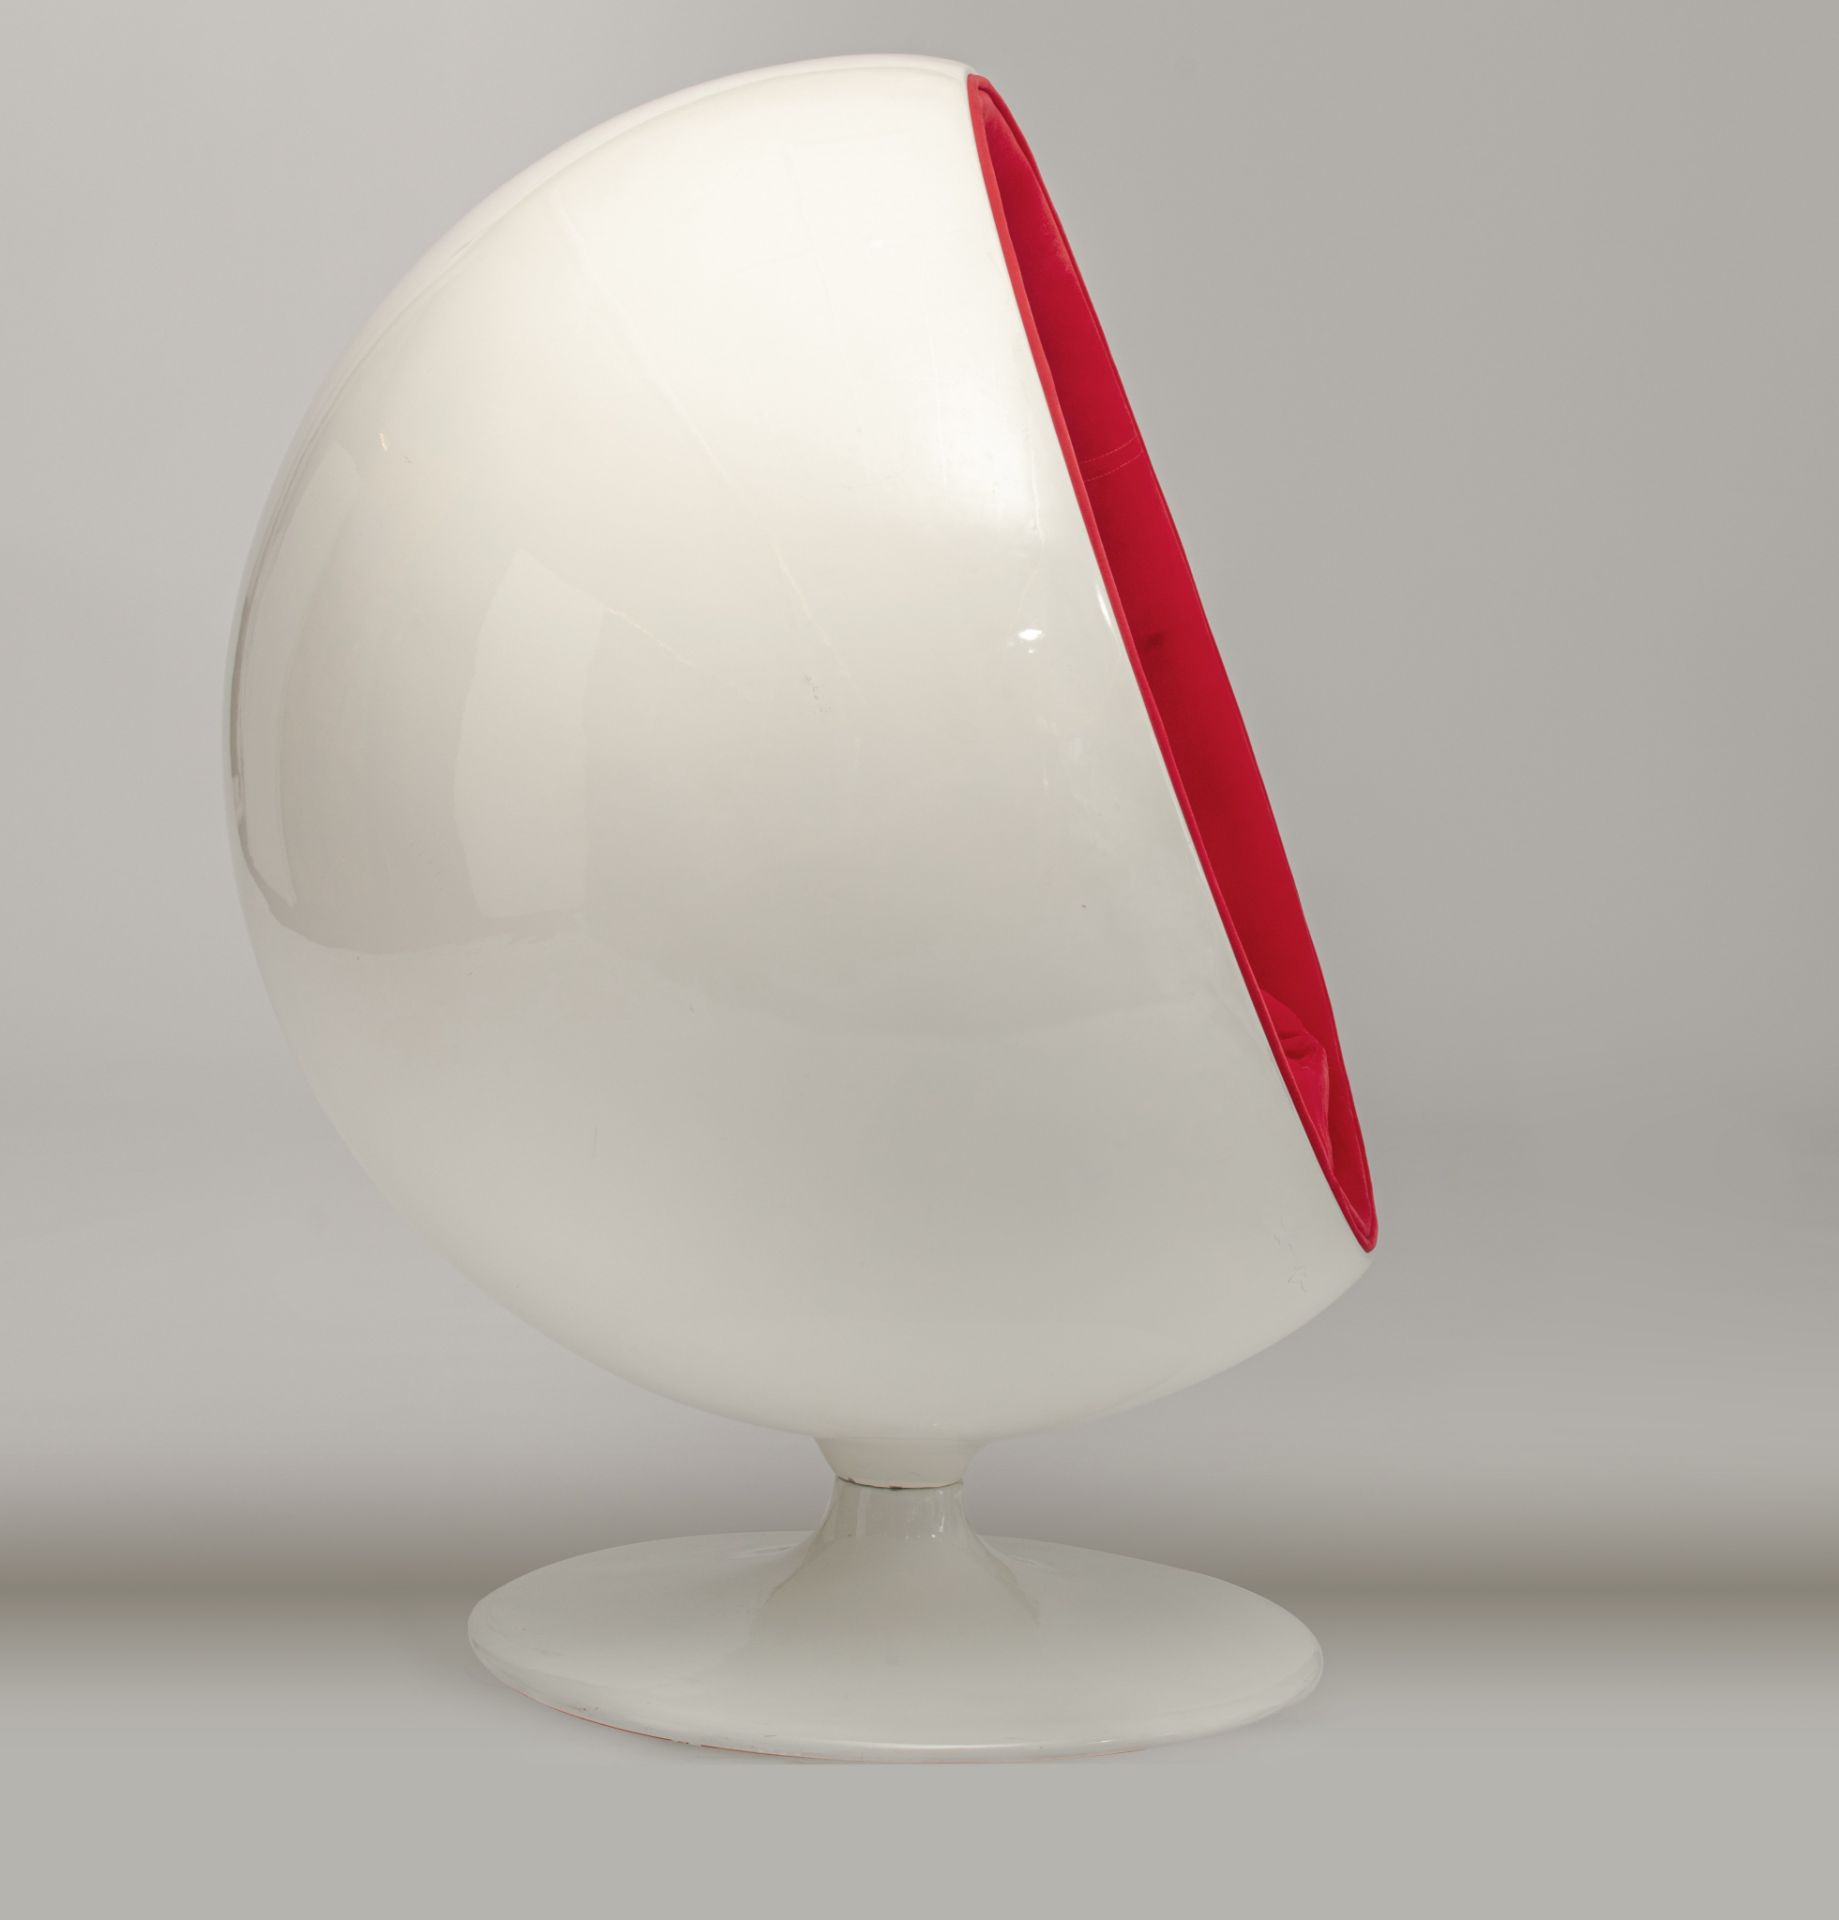 A Globe or Ball Chair by Eero Aarnio, Finland, 1966, H 120 cm - Image 6 of 16